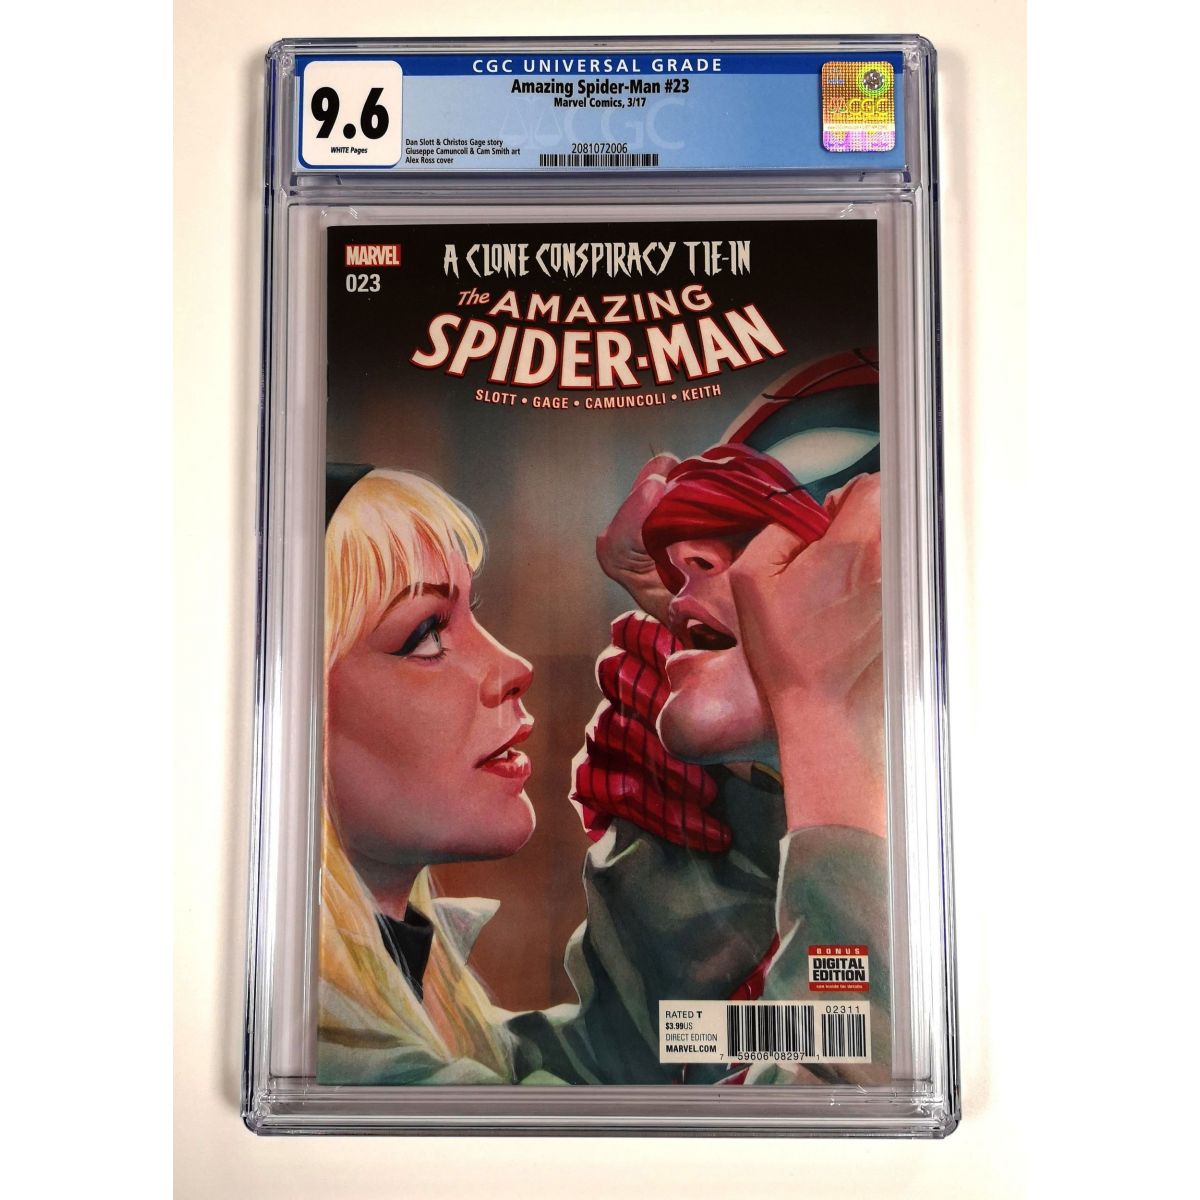 Item Comics - Marvel - Amazing Spider-Man N°23 (2015 4th Series) - [CGC 9.0 - White Pages]